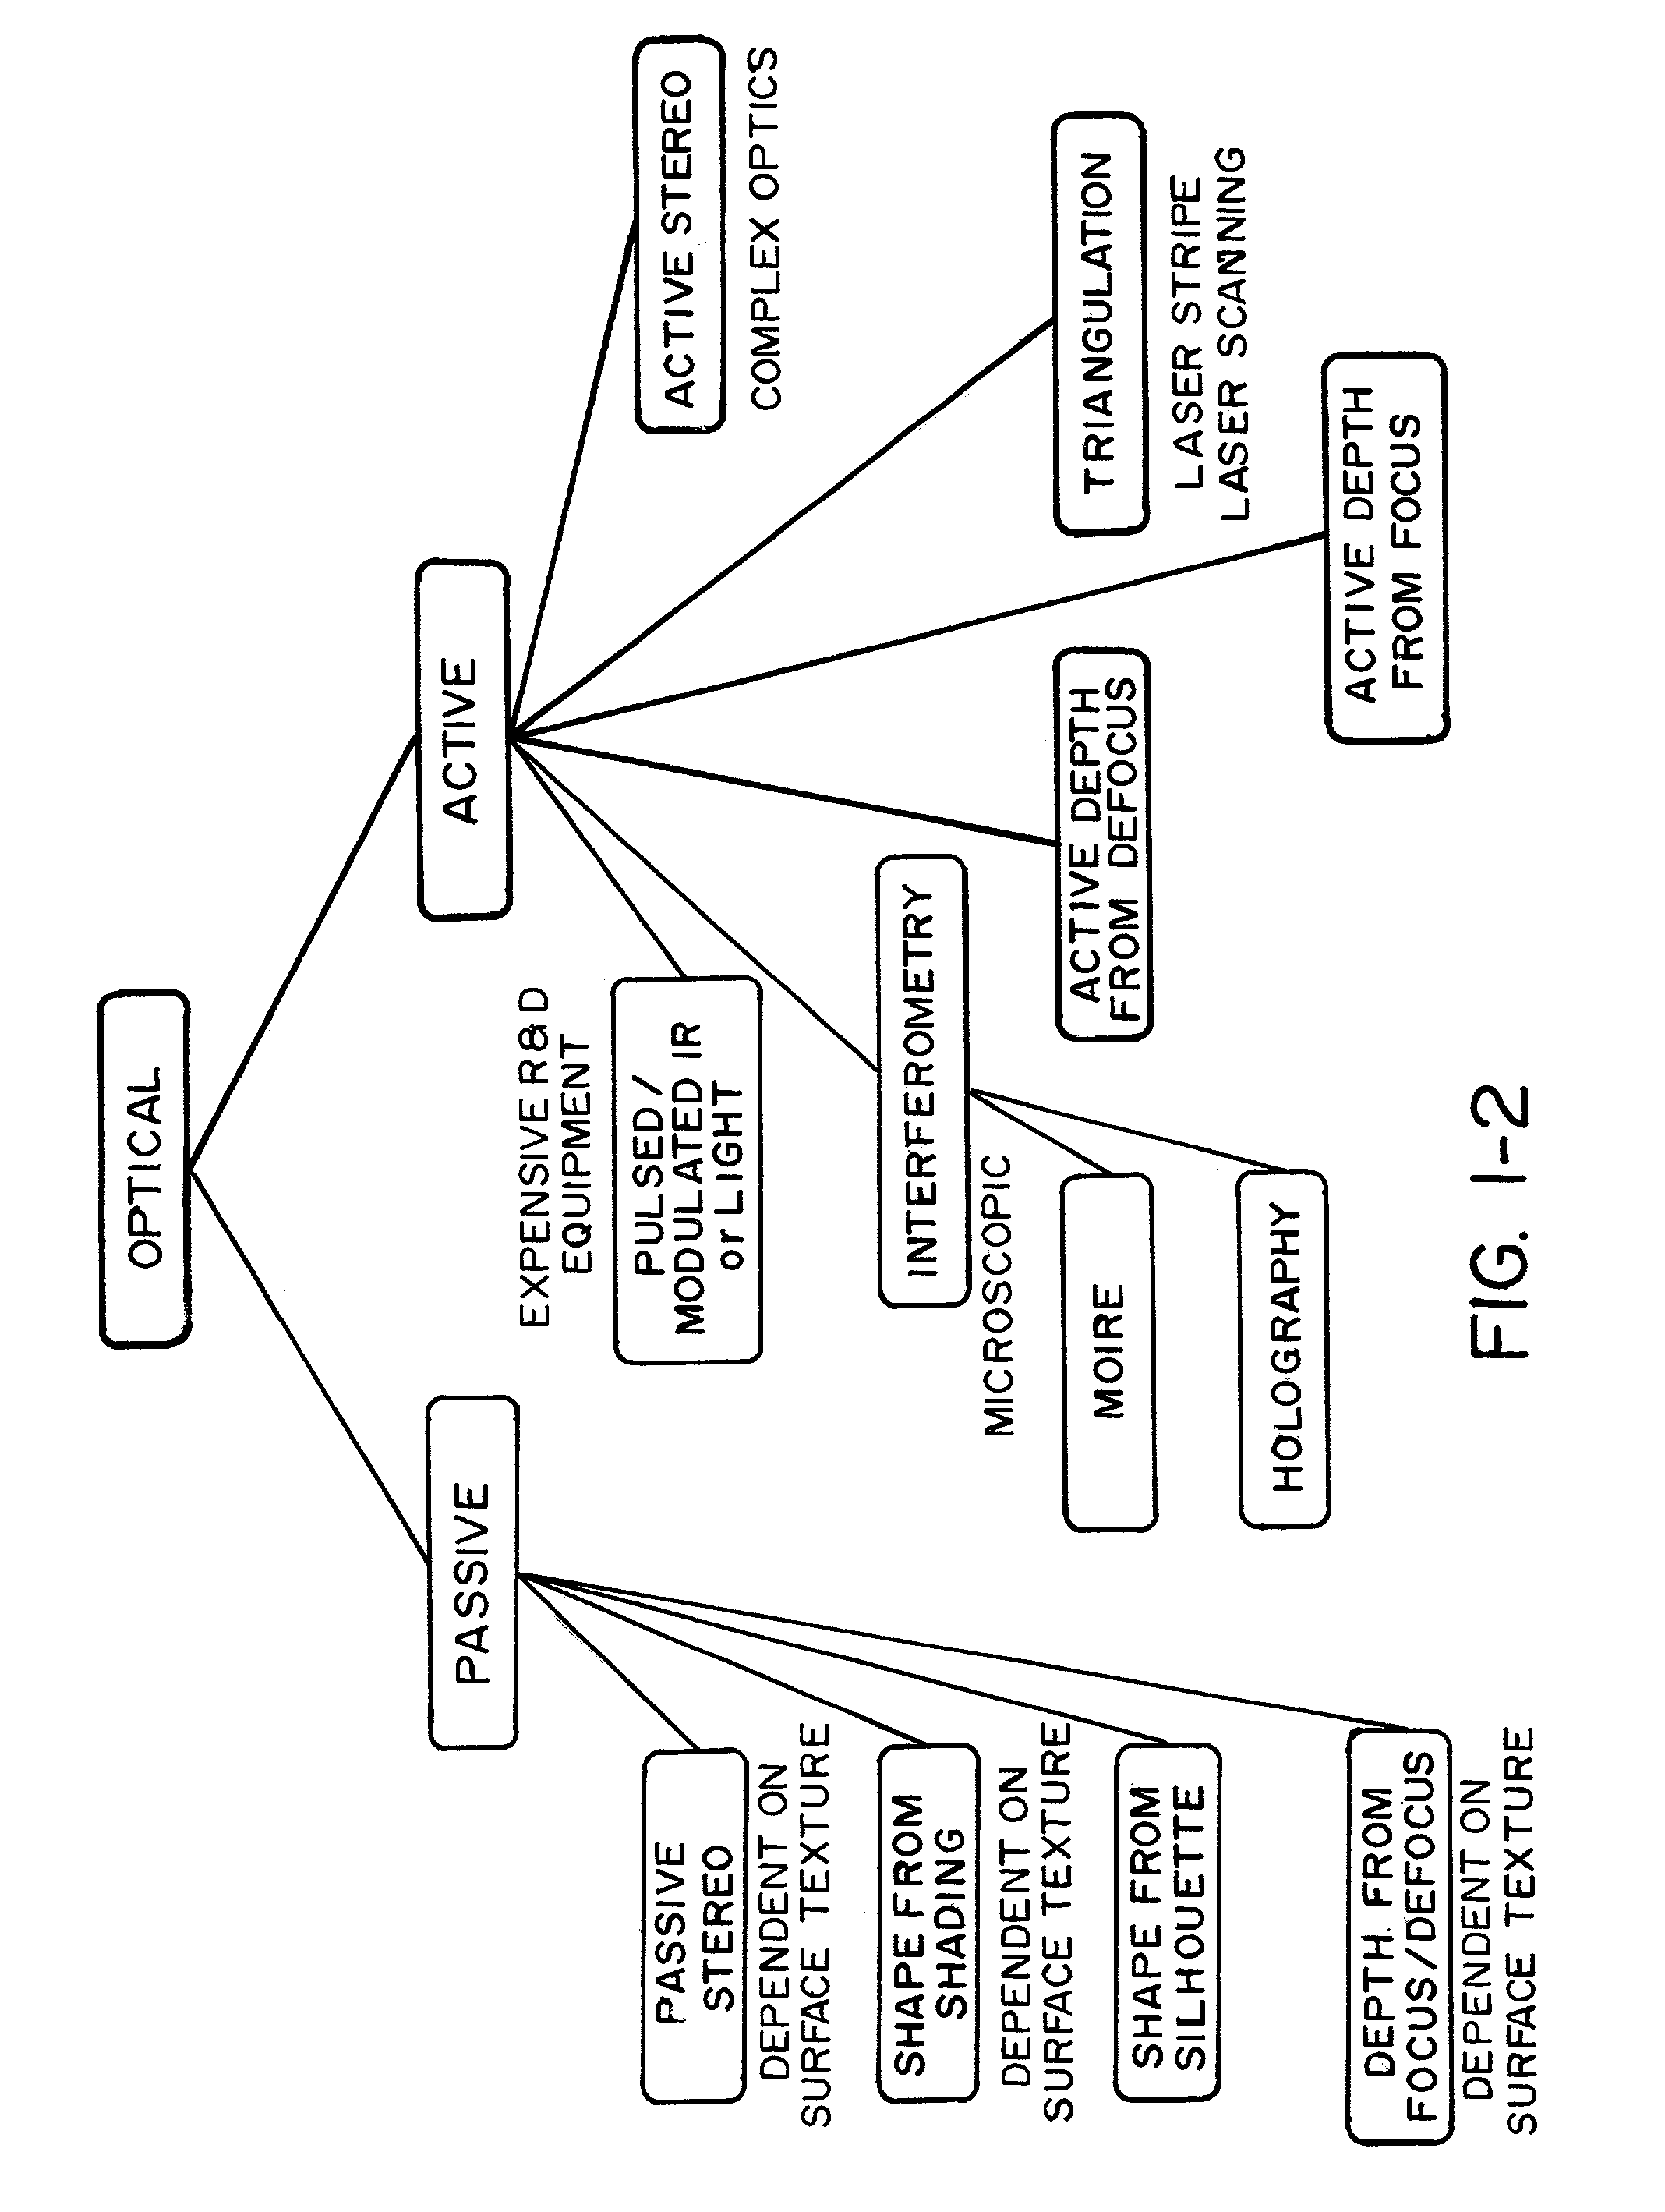 Apparatus and methods for the volumetric and dimensional measurement of livestock